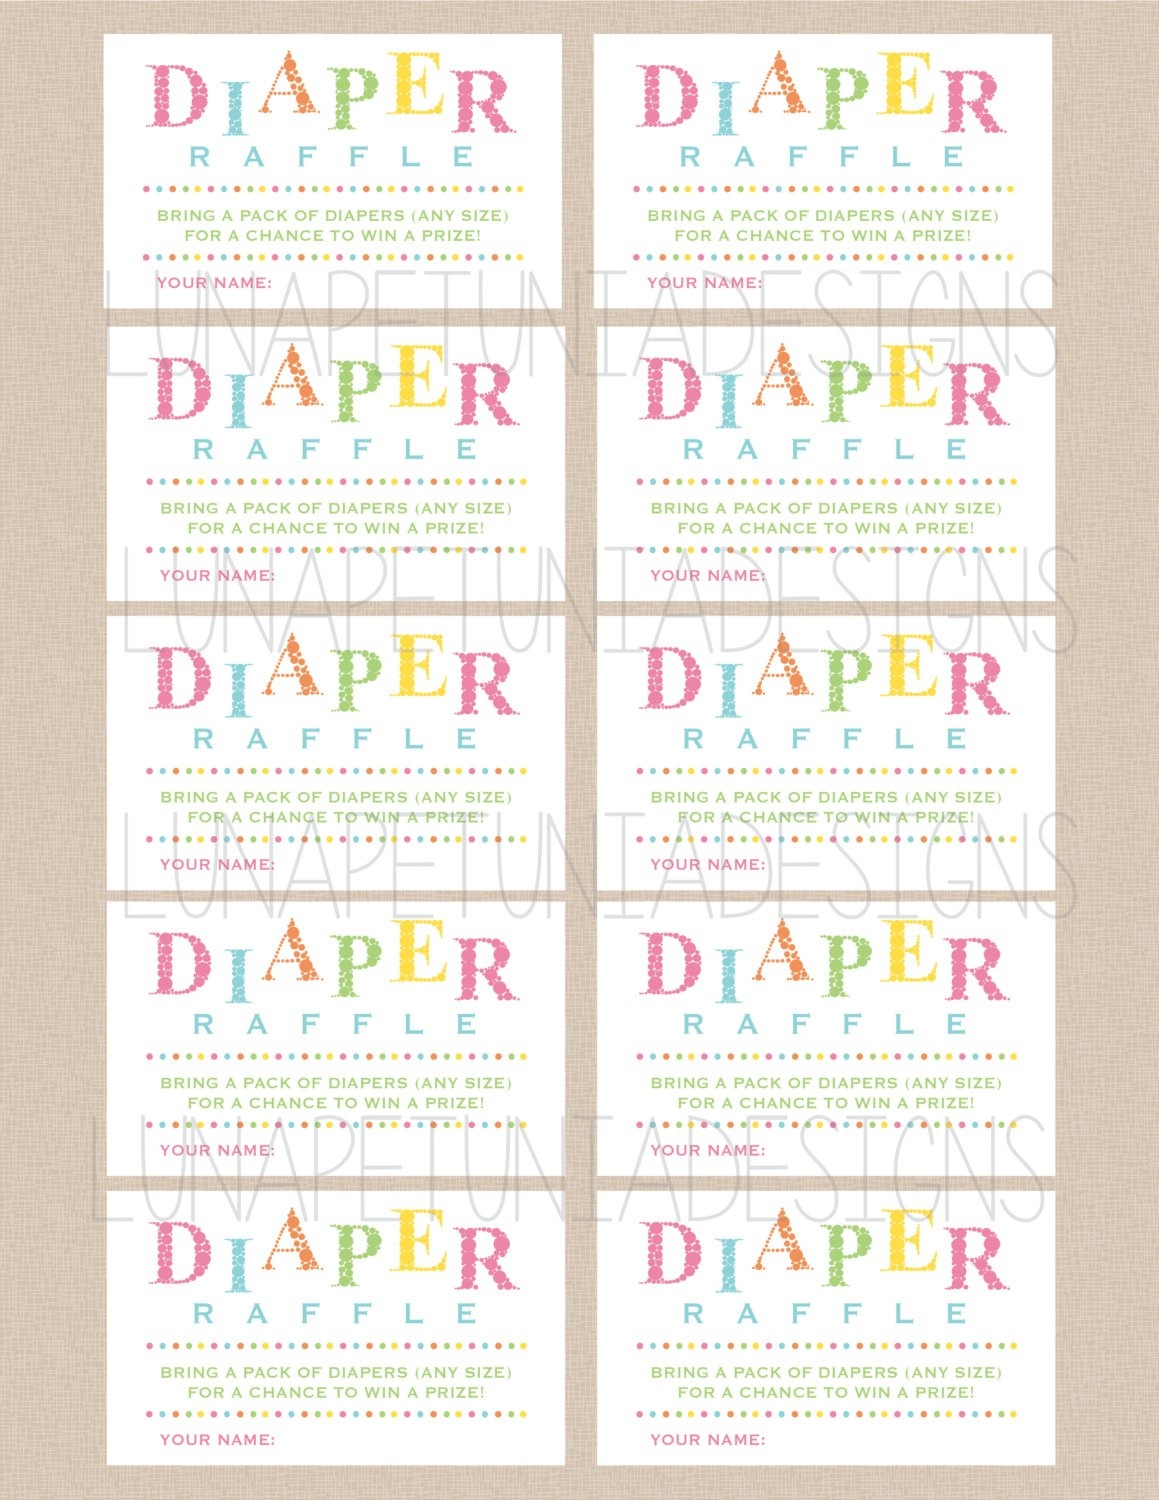 Review Free Printable Diaper Raffle Tickets For Baby Shower - Ideas - Free Printable Baby Shower Diaper Raffle Tickets